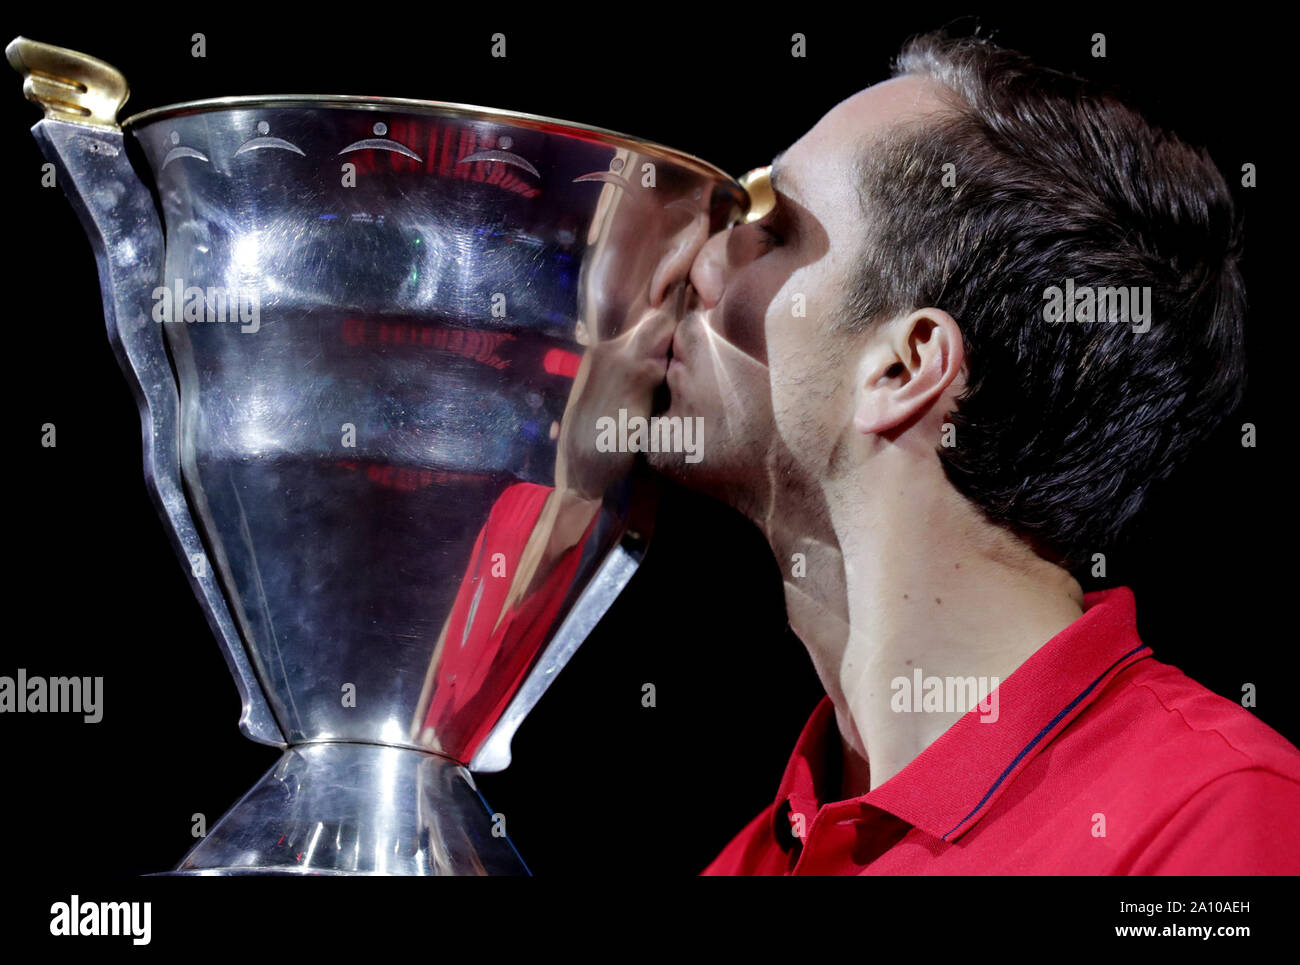 St. Petersburg, Russia. 22nd Sep, 2019. Daniil Medvedev of Russia kisses the trophy during the awarding ceremony after the final match against Borna Coric of Croatia at St. Petersburg Open ATP tennis tour in St. Petersburg, Russia, Sept. 22, 2019. Credit: Irina Motina/Xinhua/Alamy Live News Stock Photo